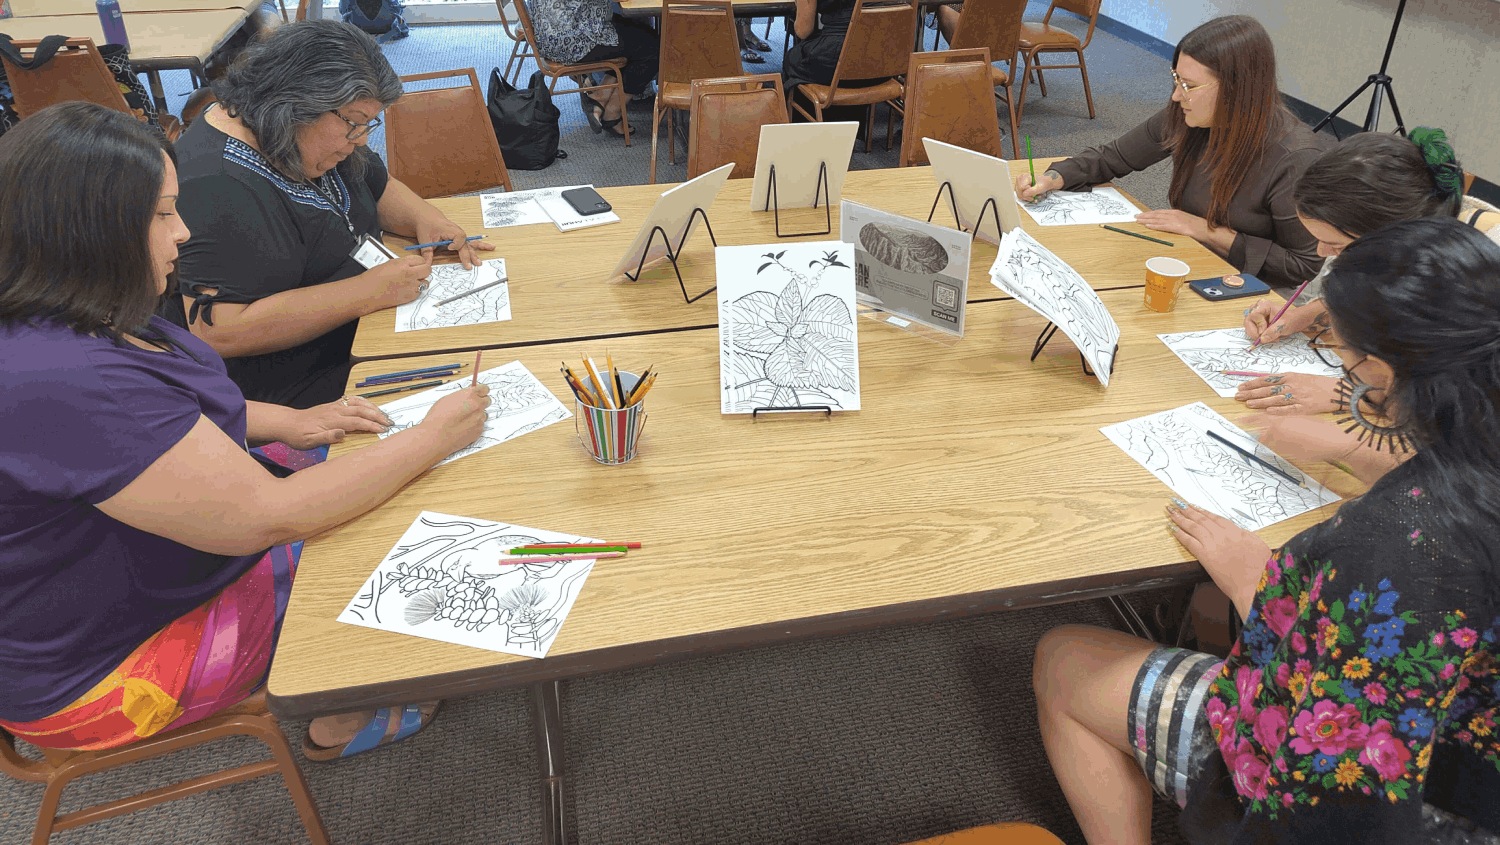 Four forum attendees sit at grouped tables, colouring in Hawaiʻian motif drawings with colour pencils and pens.